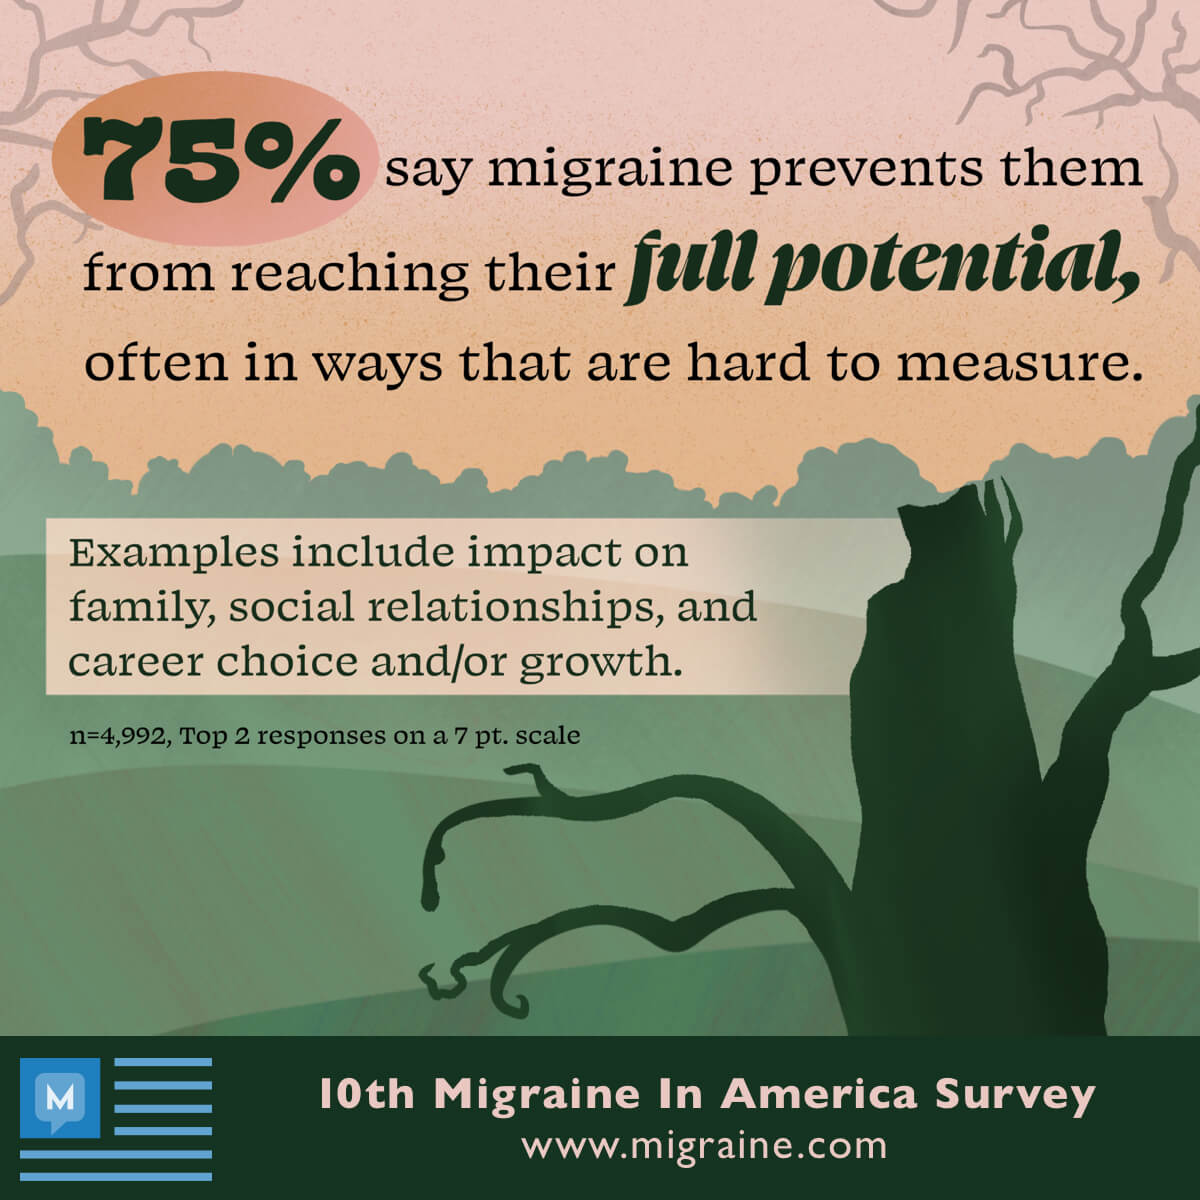 75% of Migraine In America Survey respondents say migraine prevents them from reaching their full potential.